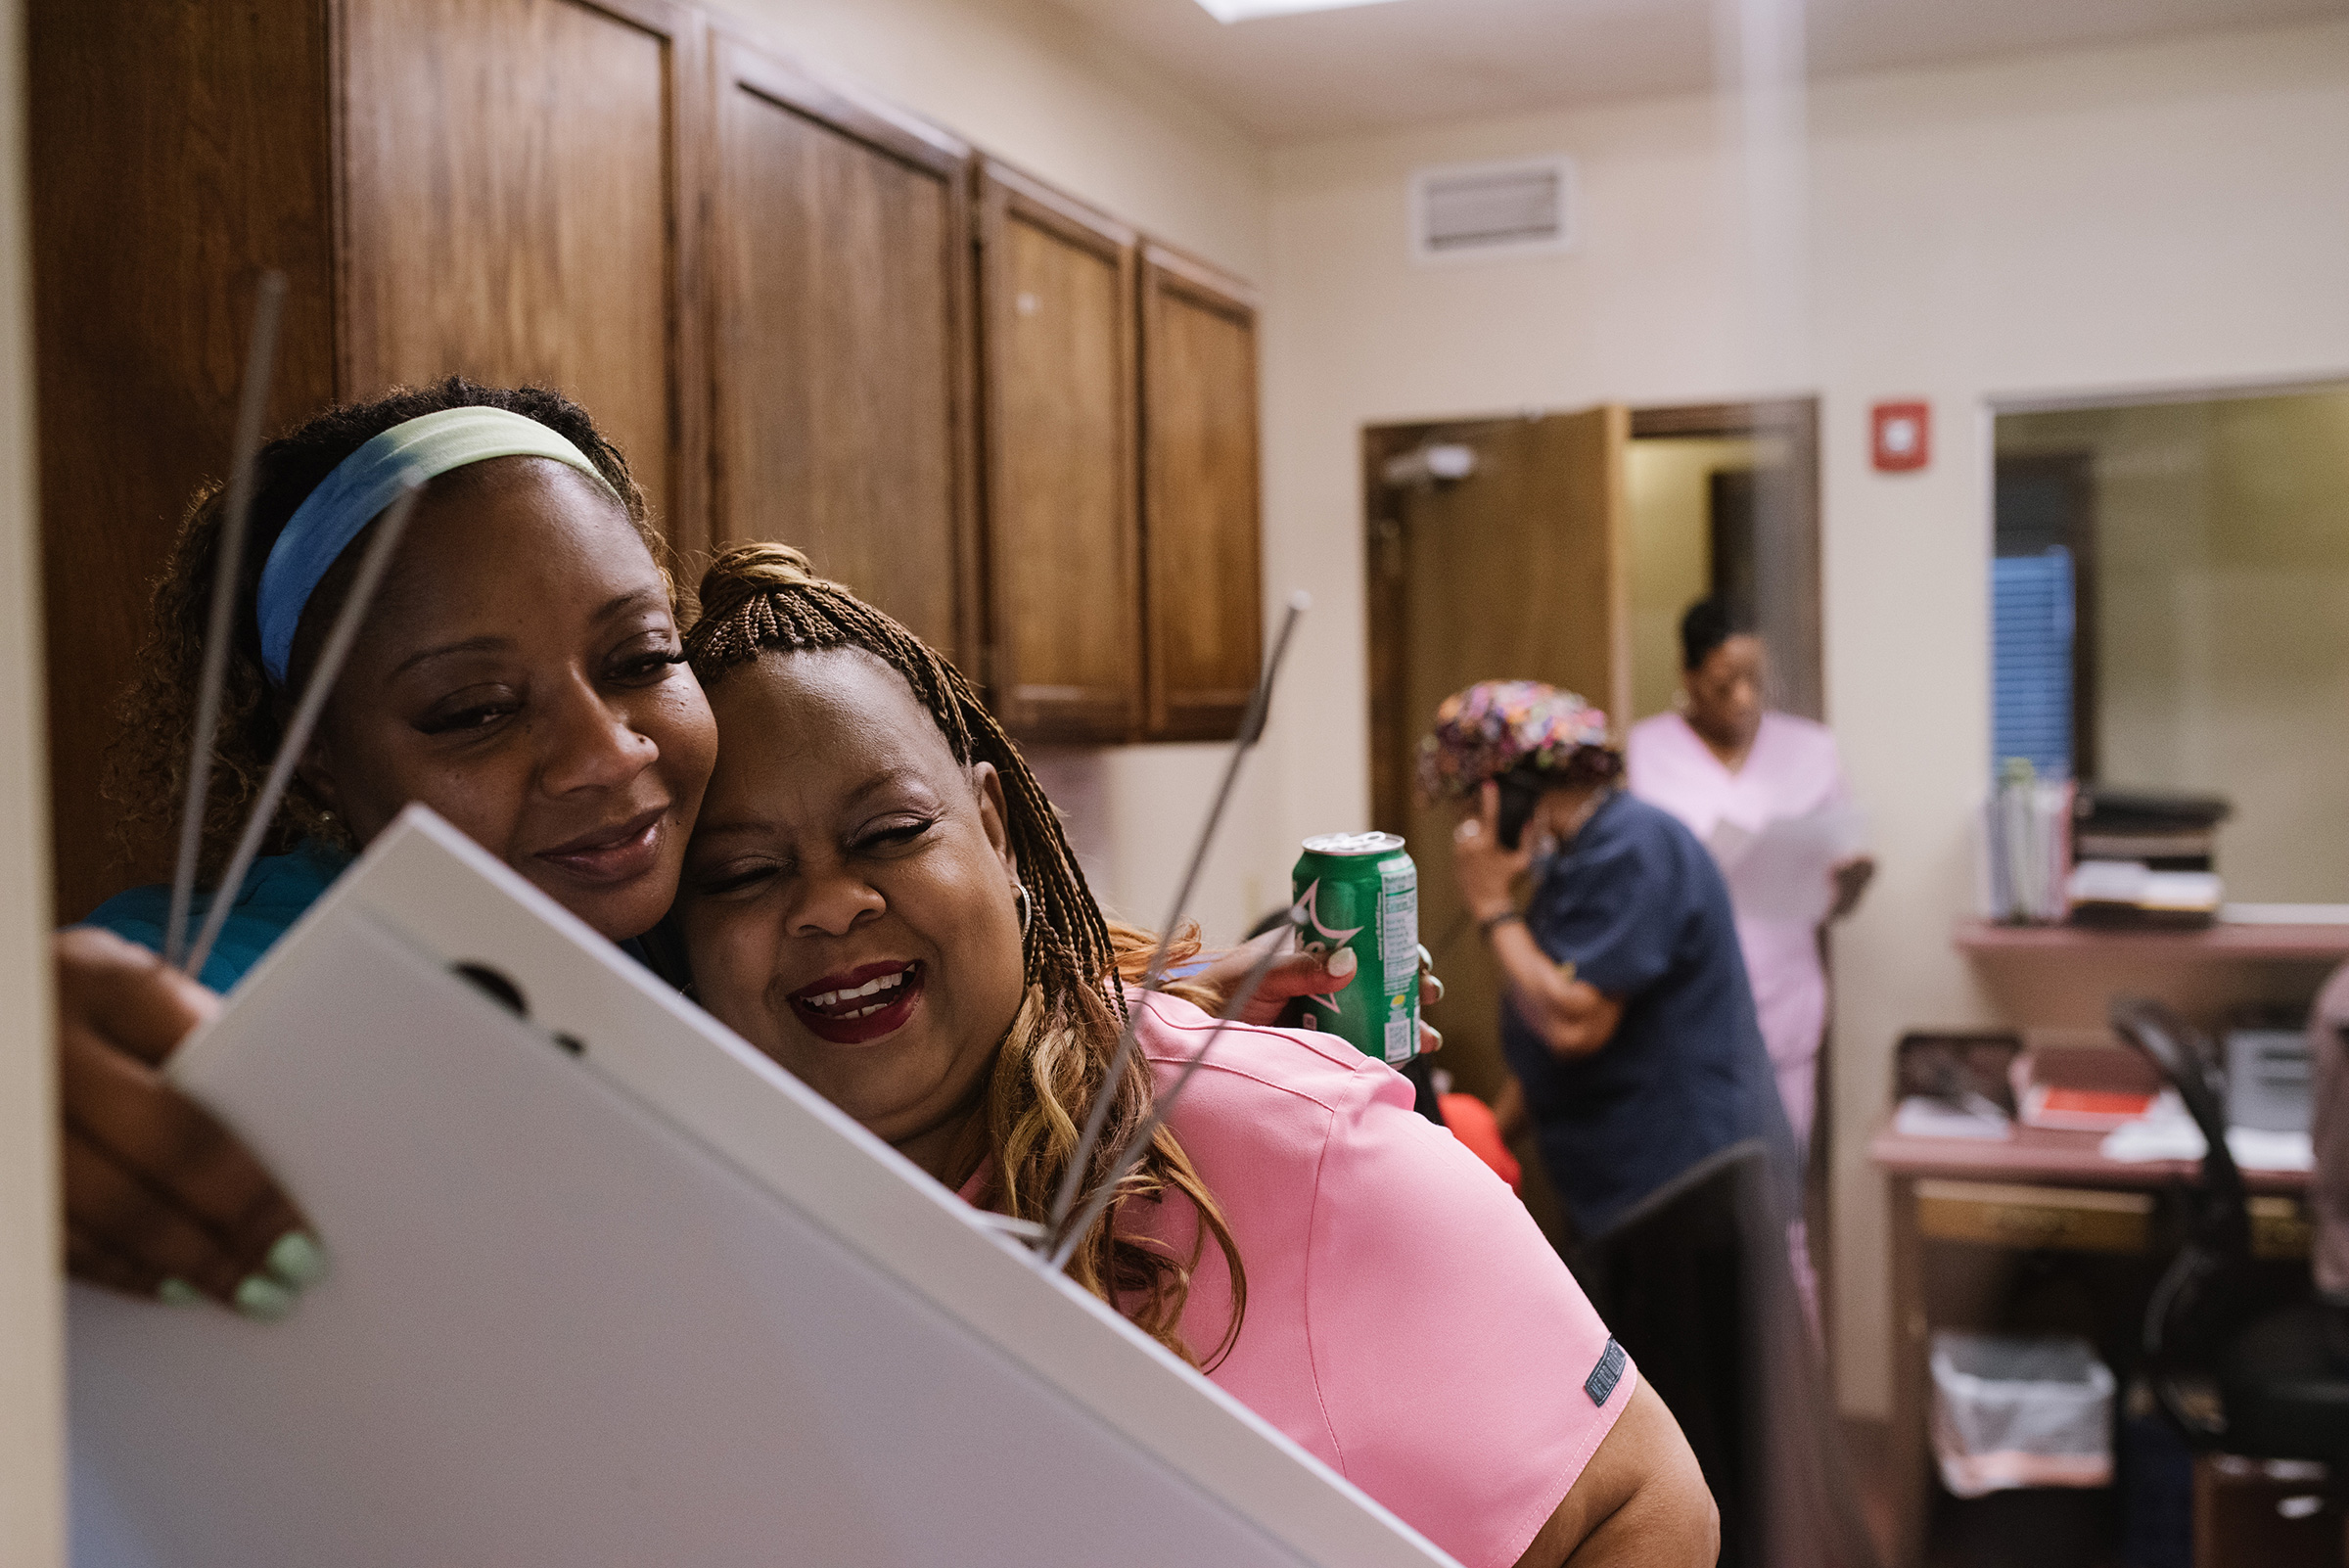 Medical assistant Ramona Wallace (left) embraces Gail Latham (right). Tuscaloosa, Alabama. Monday July 11, 2022. Photo by Lucy Garrett for TIME